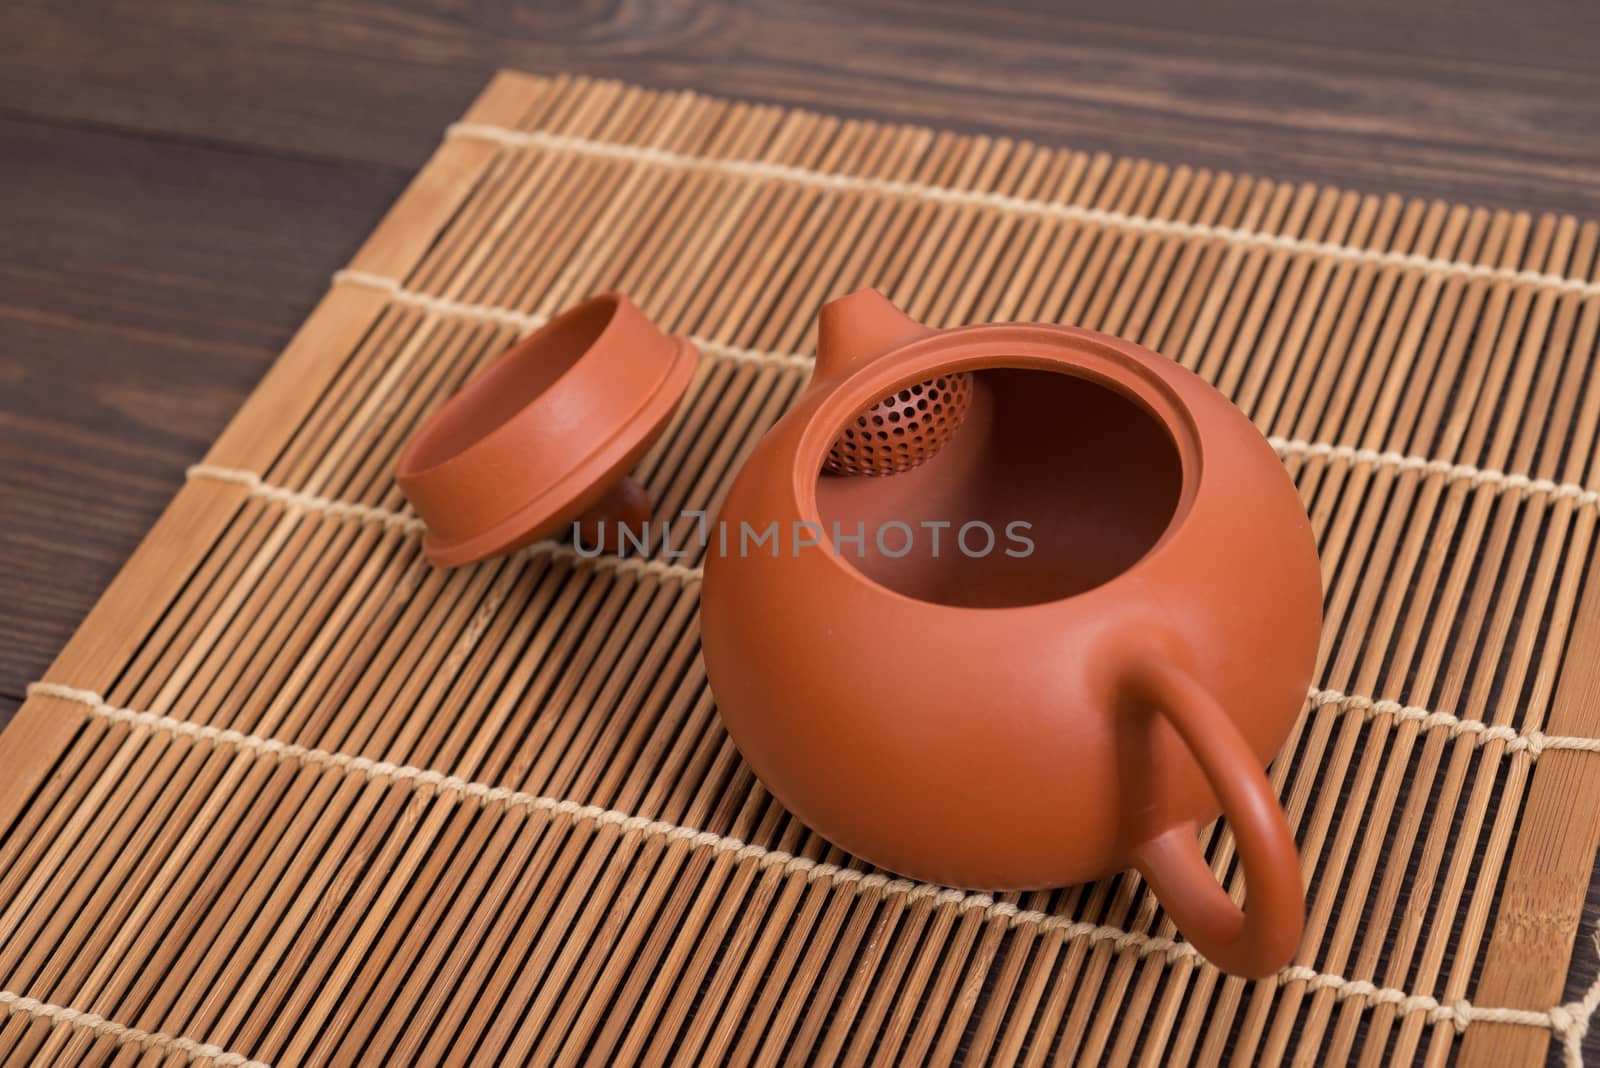 Earthenware for tea for Chinese traditional ceremony